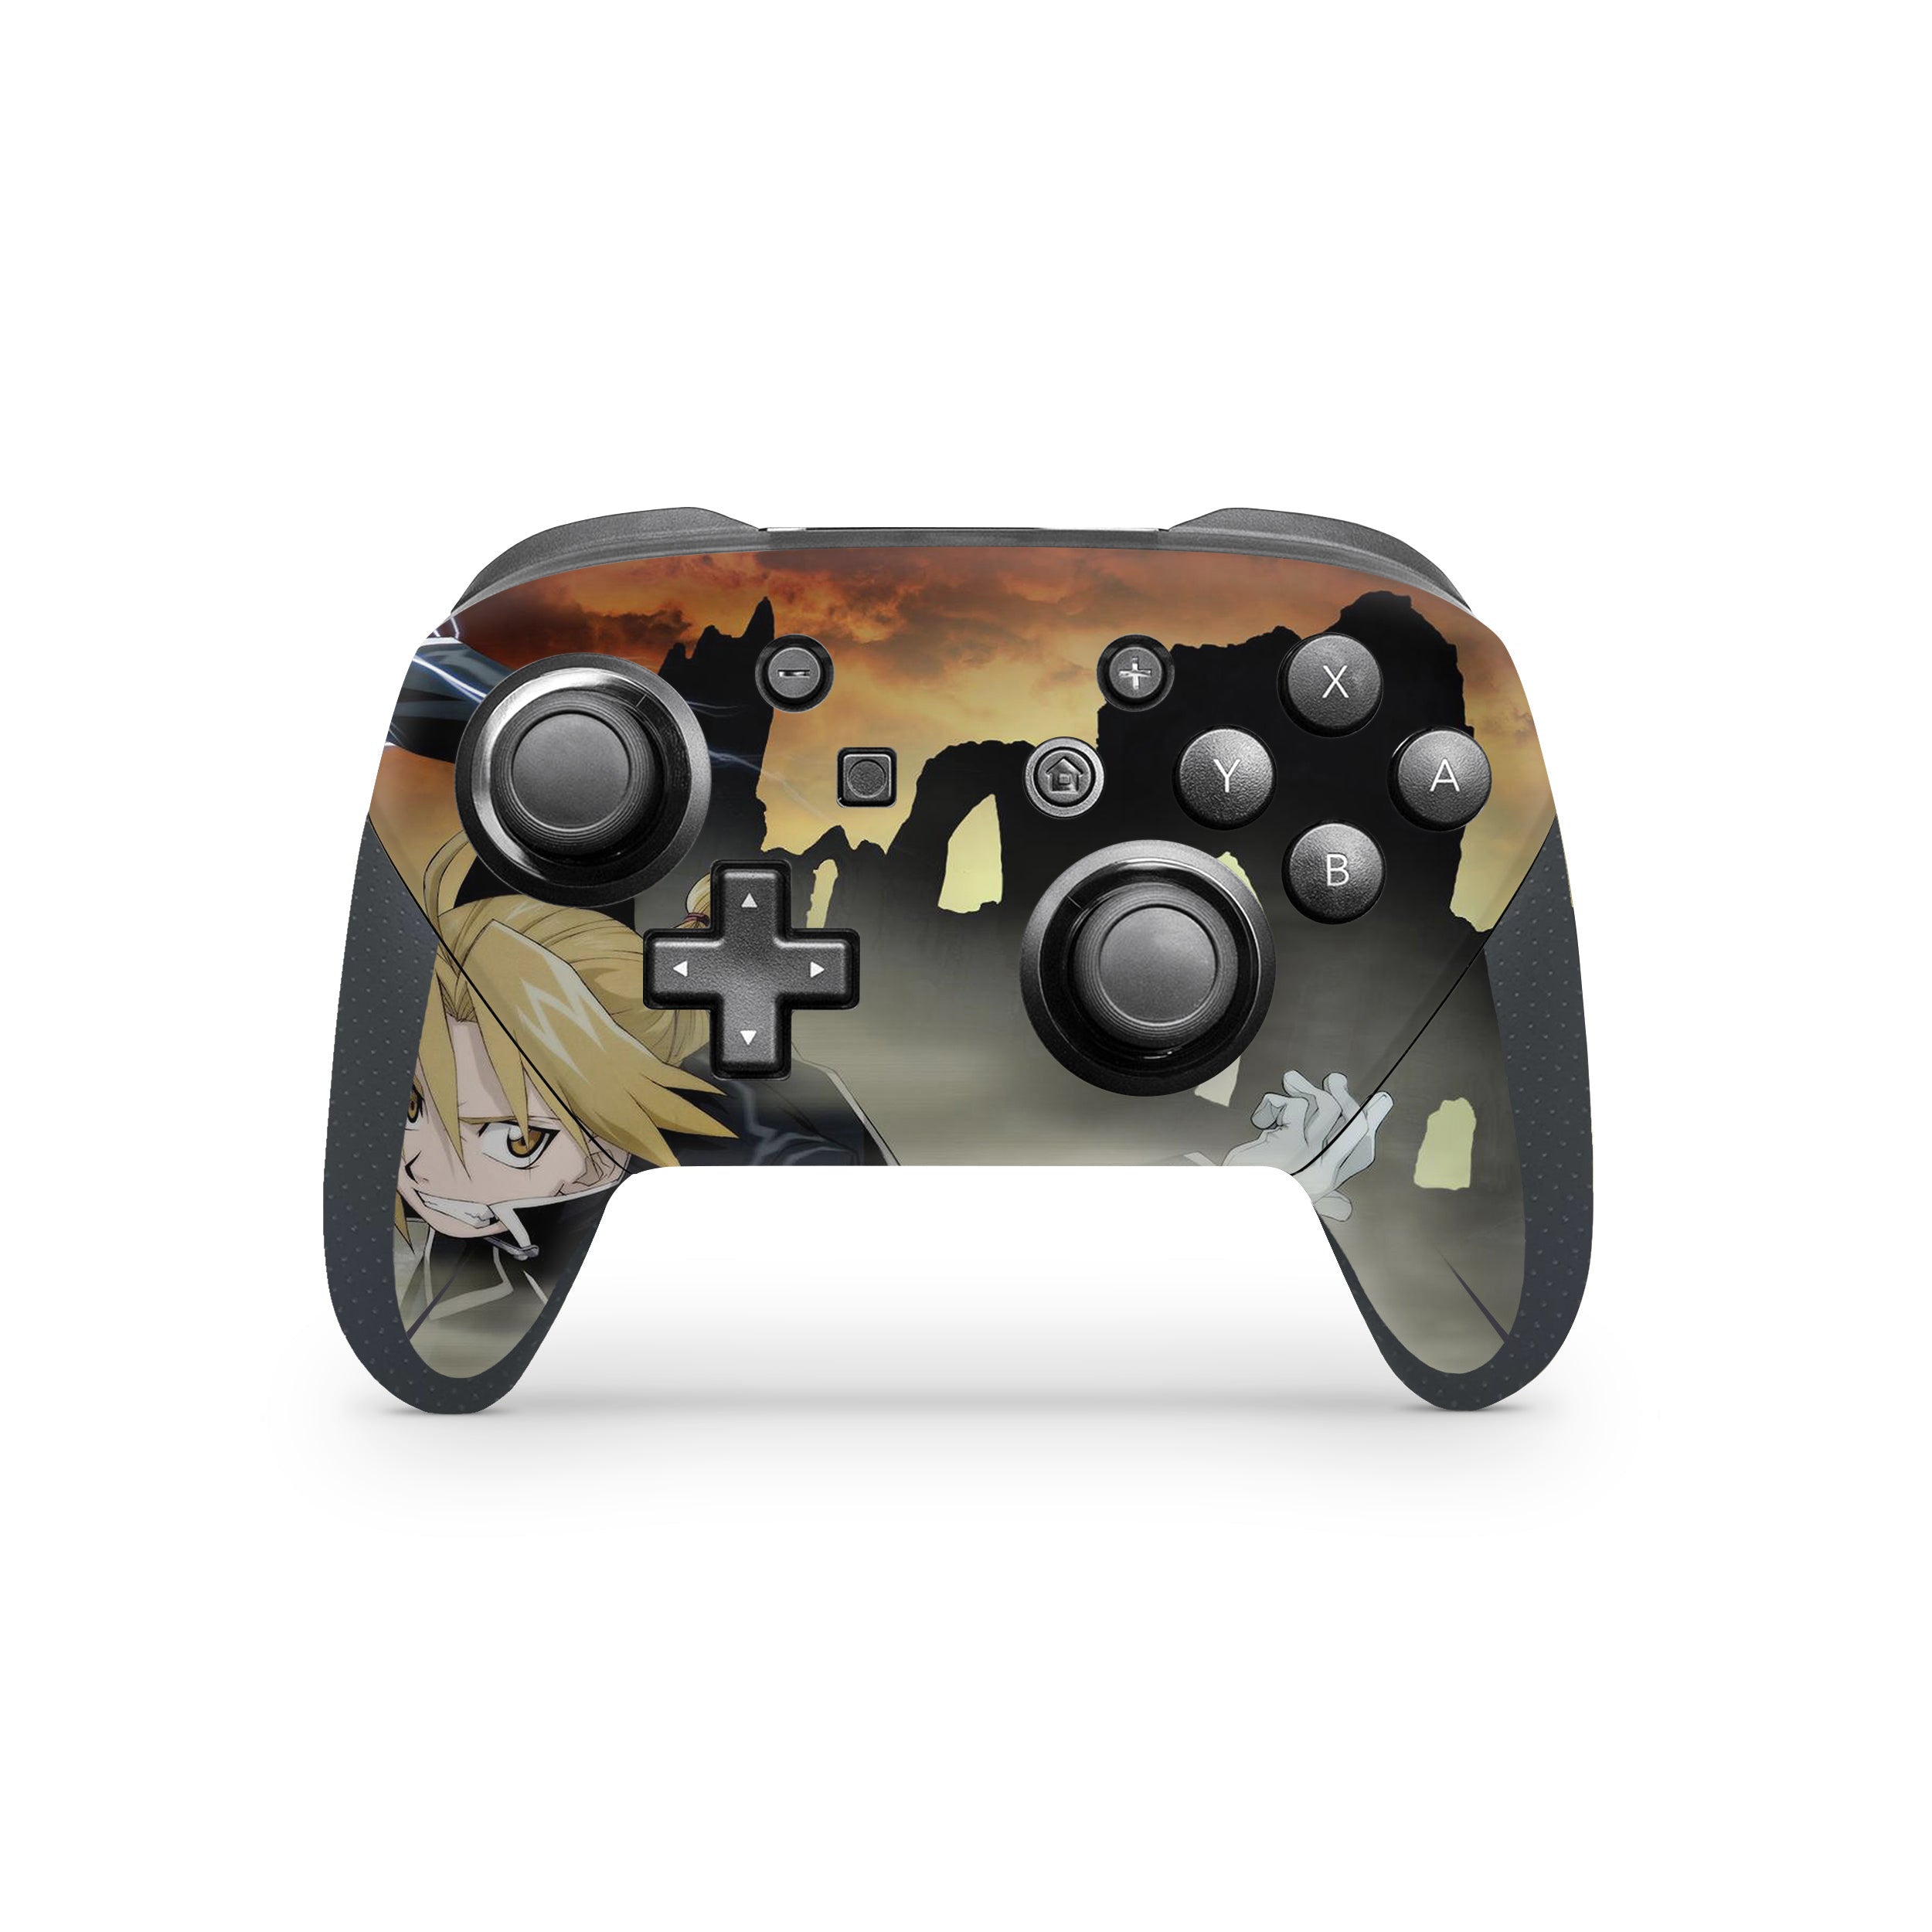 A video game skin featuring a Fullmetal Alchemist Edward Elric design for the Switch Pro Controller.